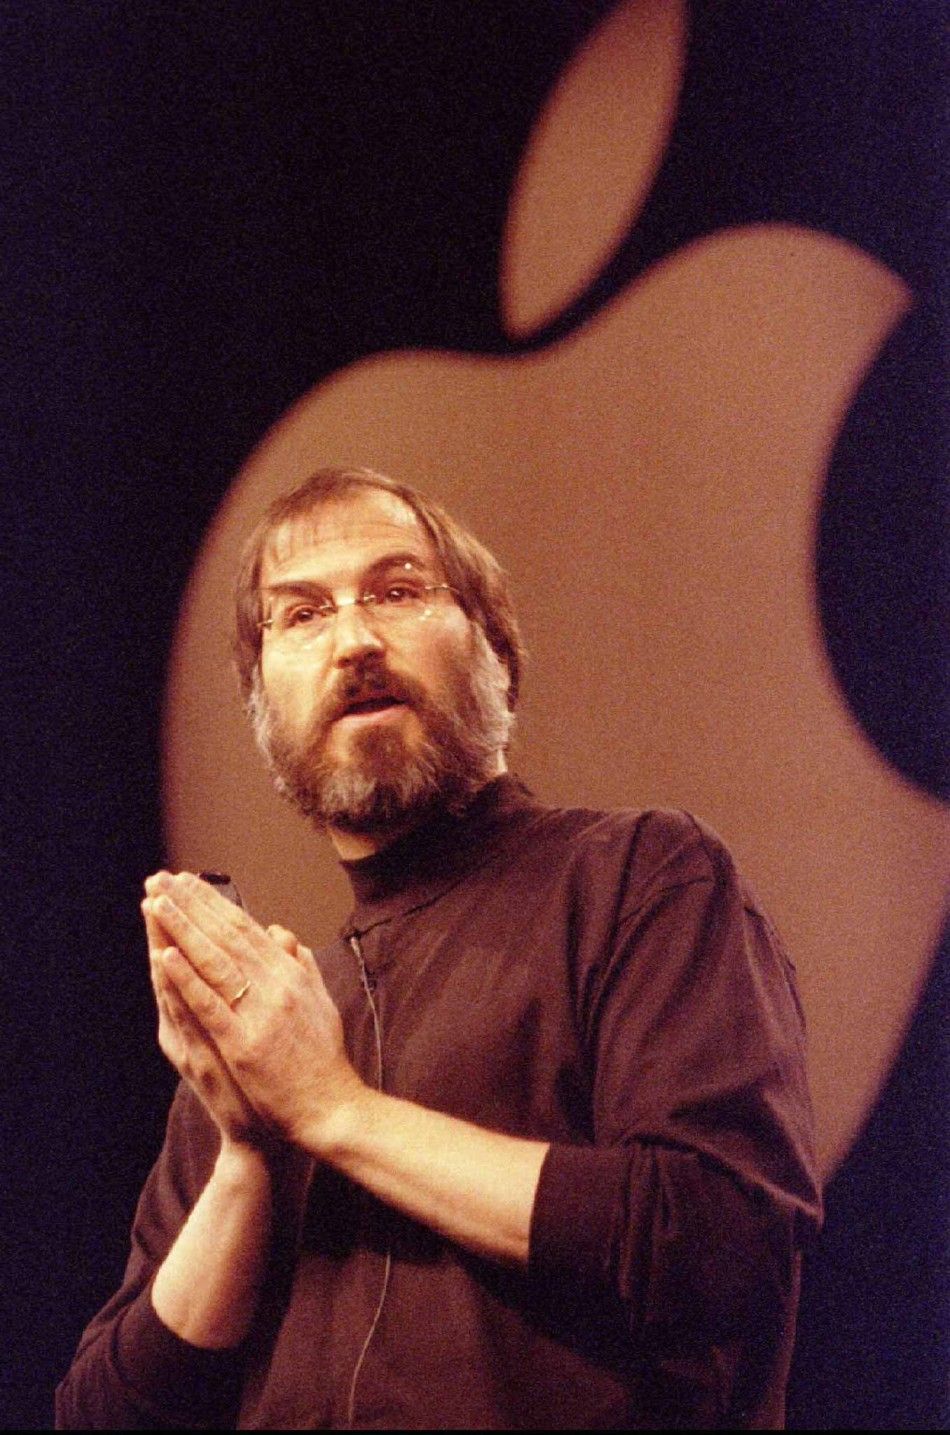 Apple Computers Interim CEO Steve Jobs delivers the keynote speech at the MacWorld Expo at San Franciscos Marriott Hotel